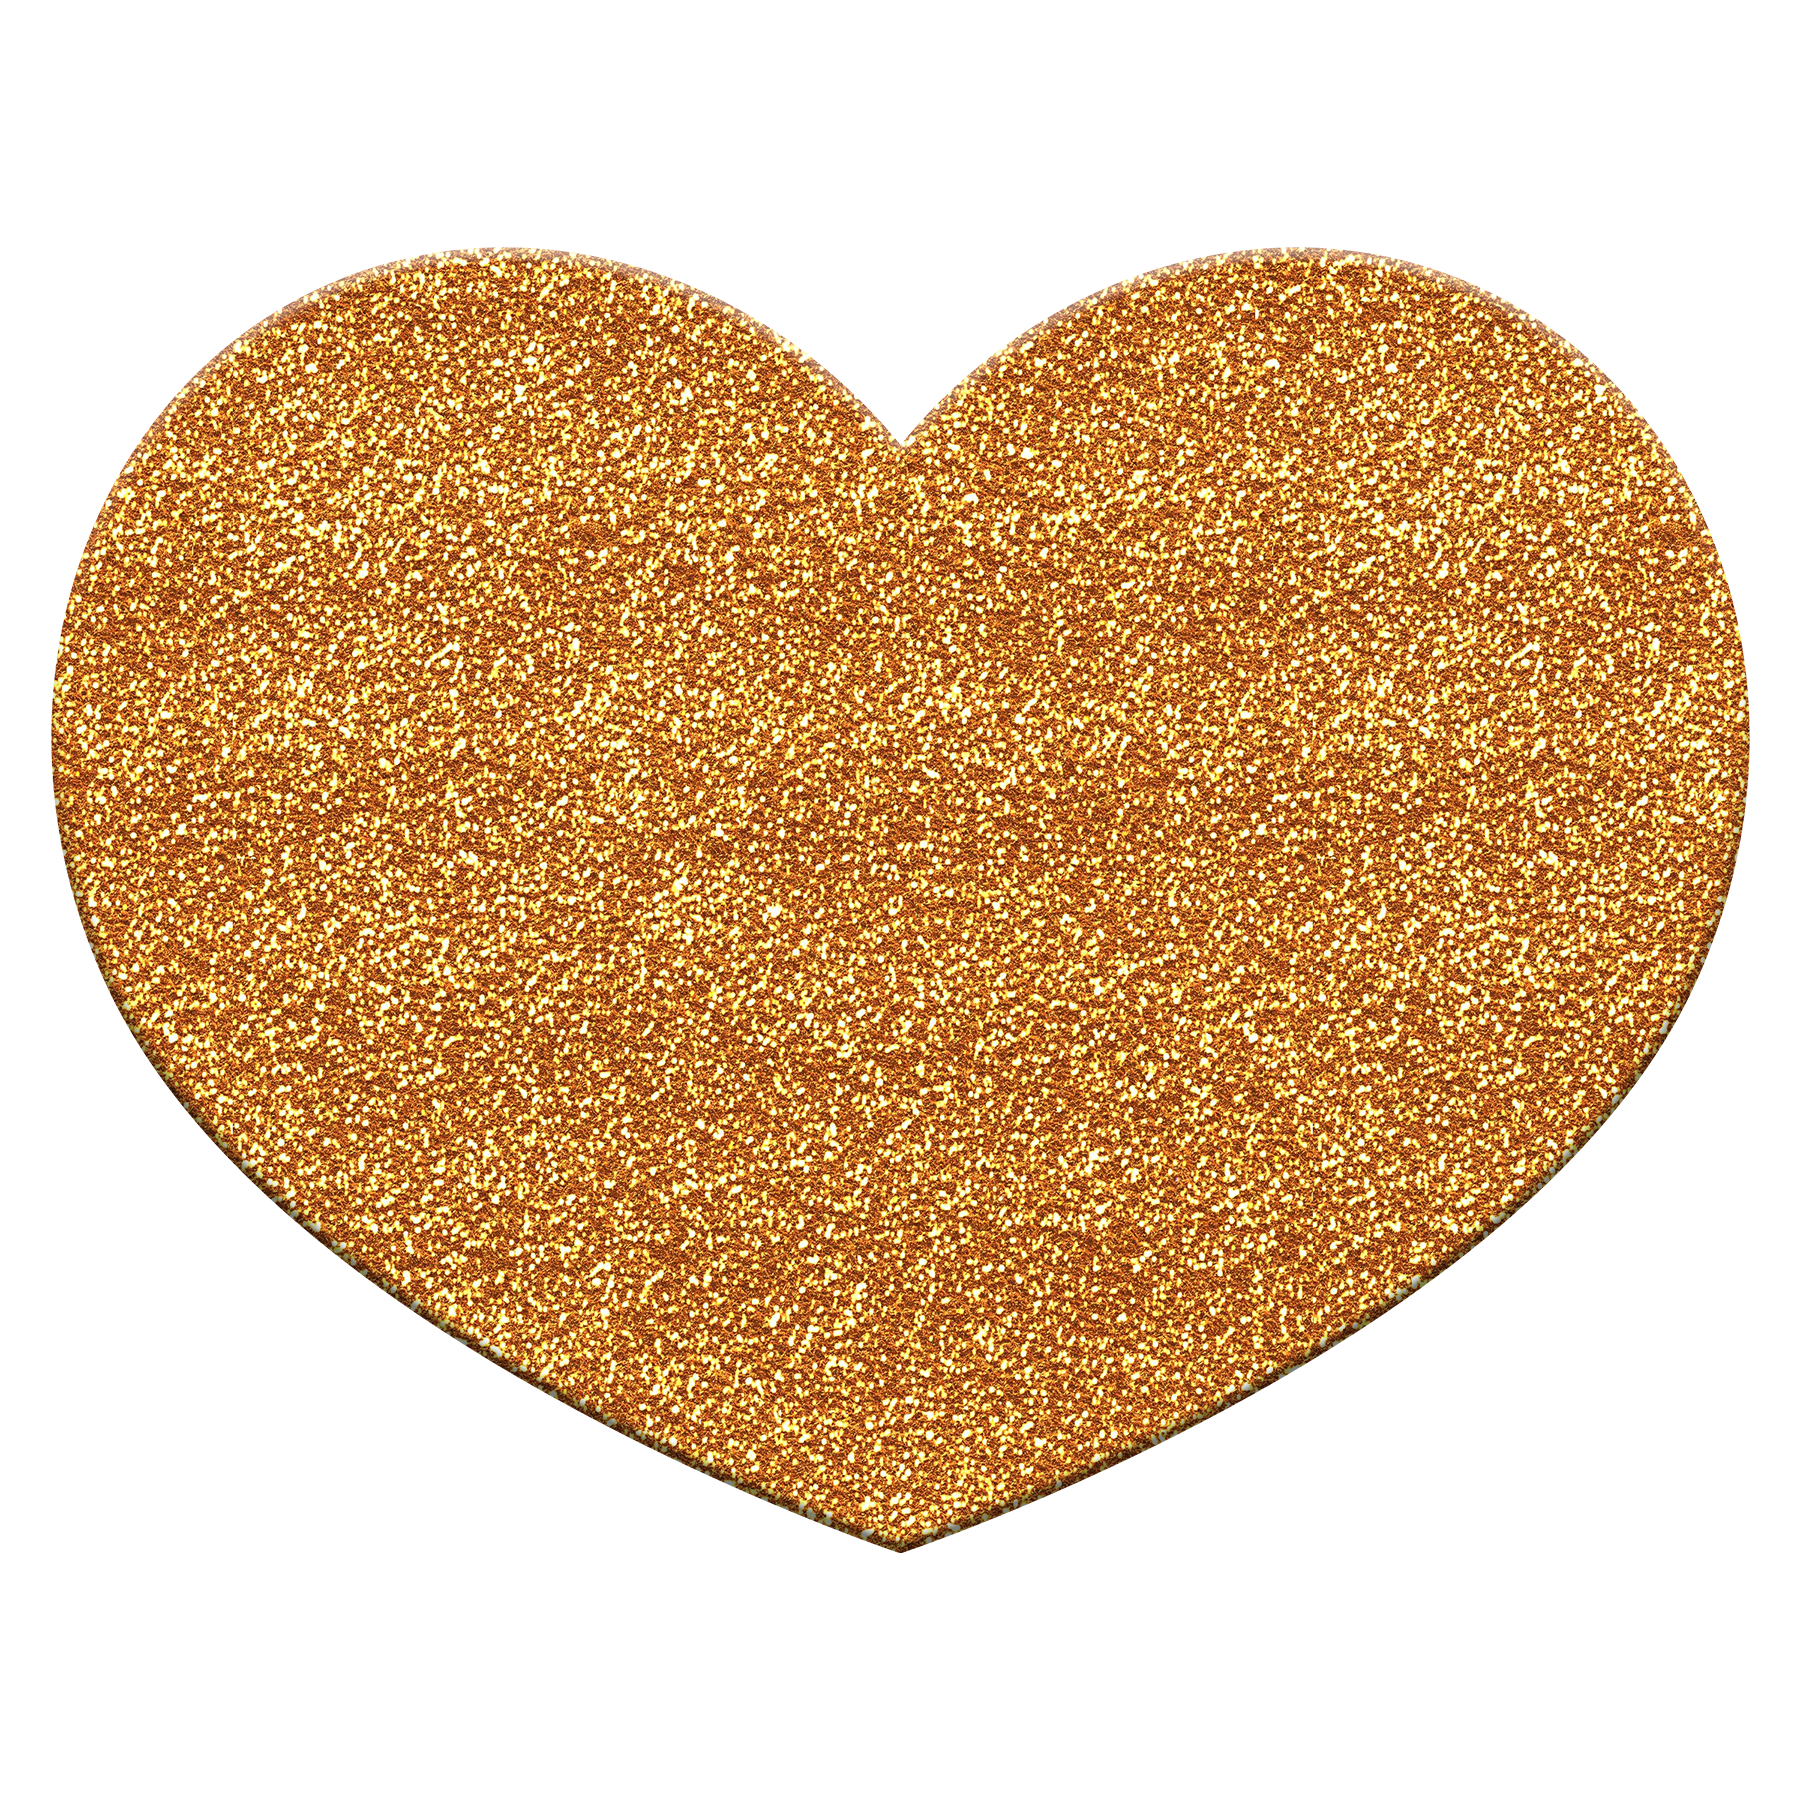 Feather clipart glitter. Hearts freebies free clip